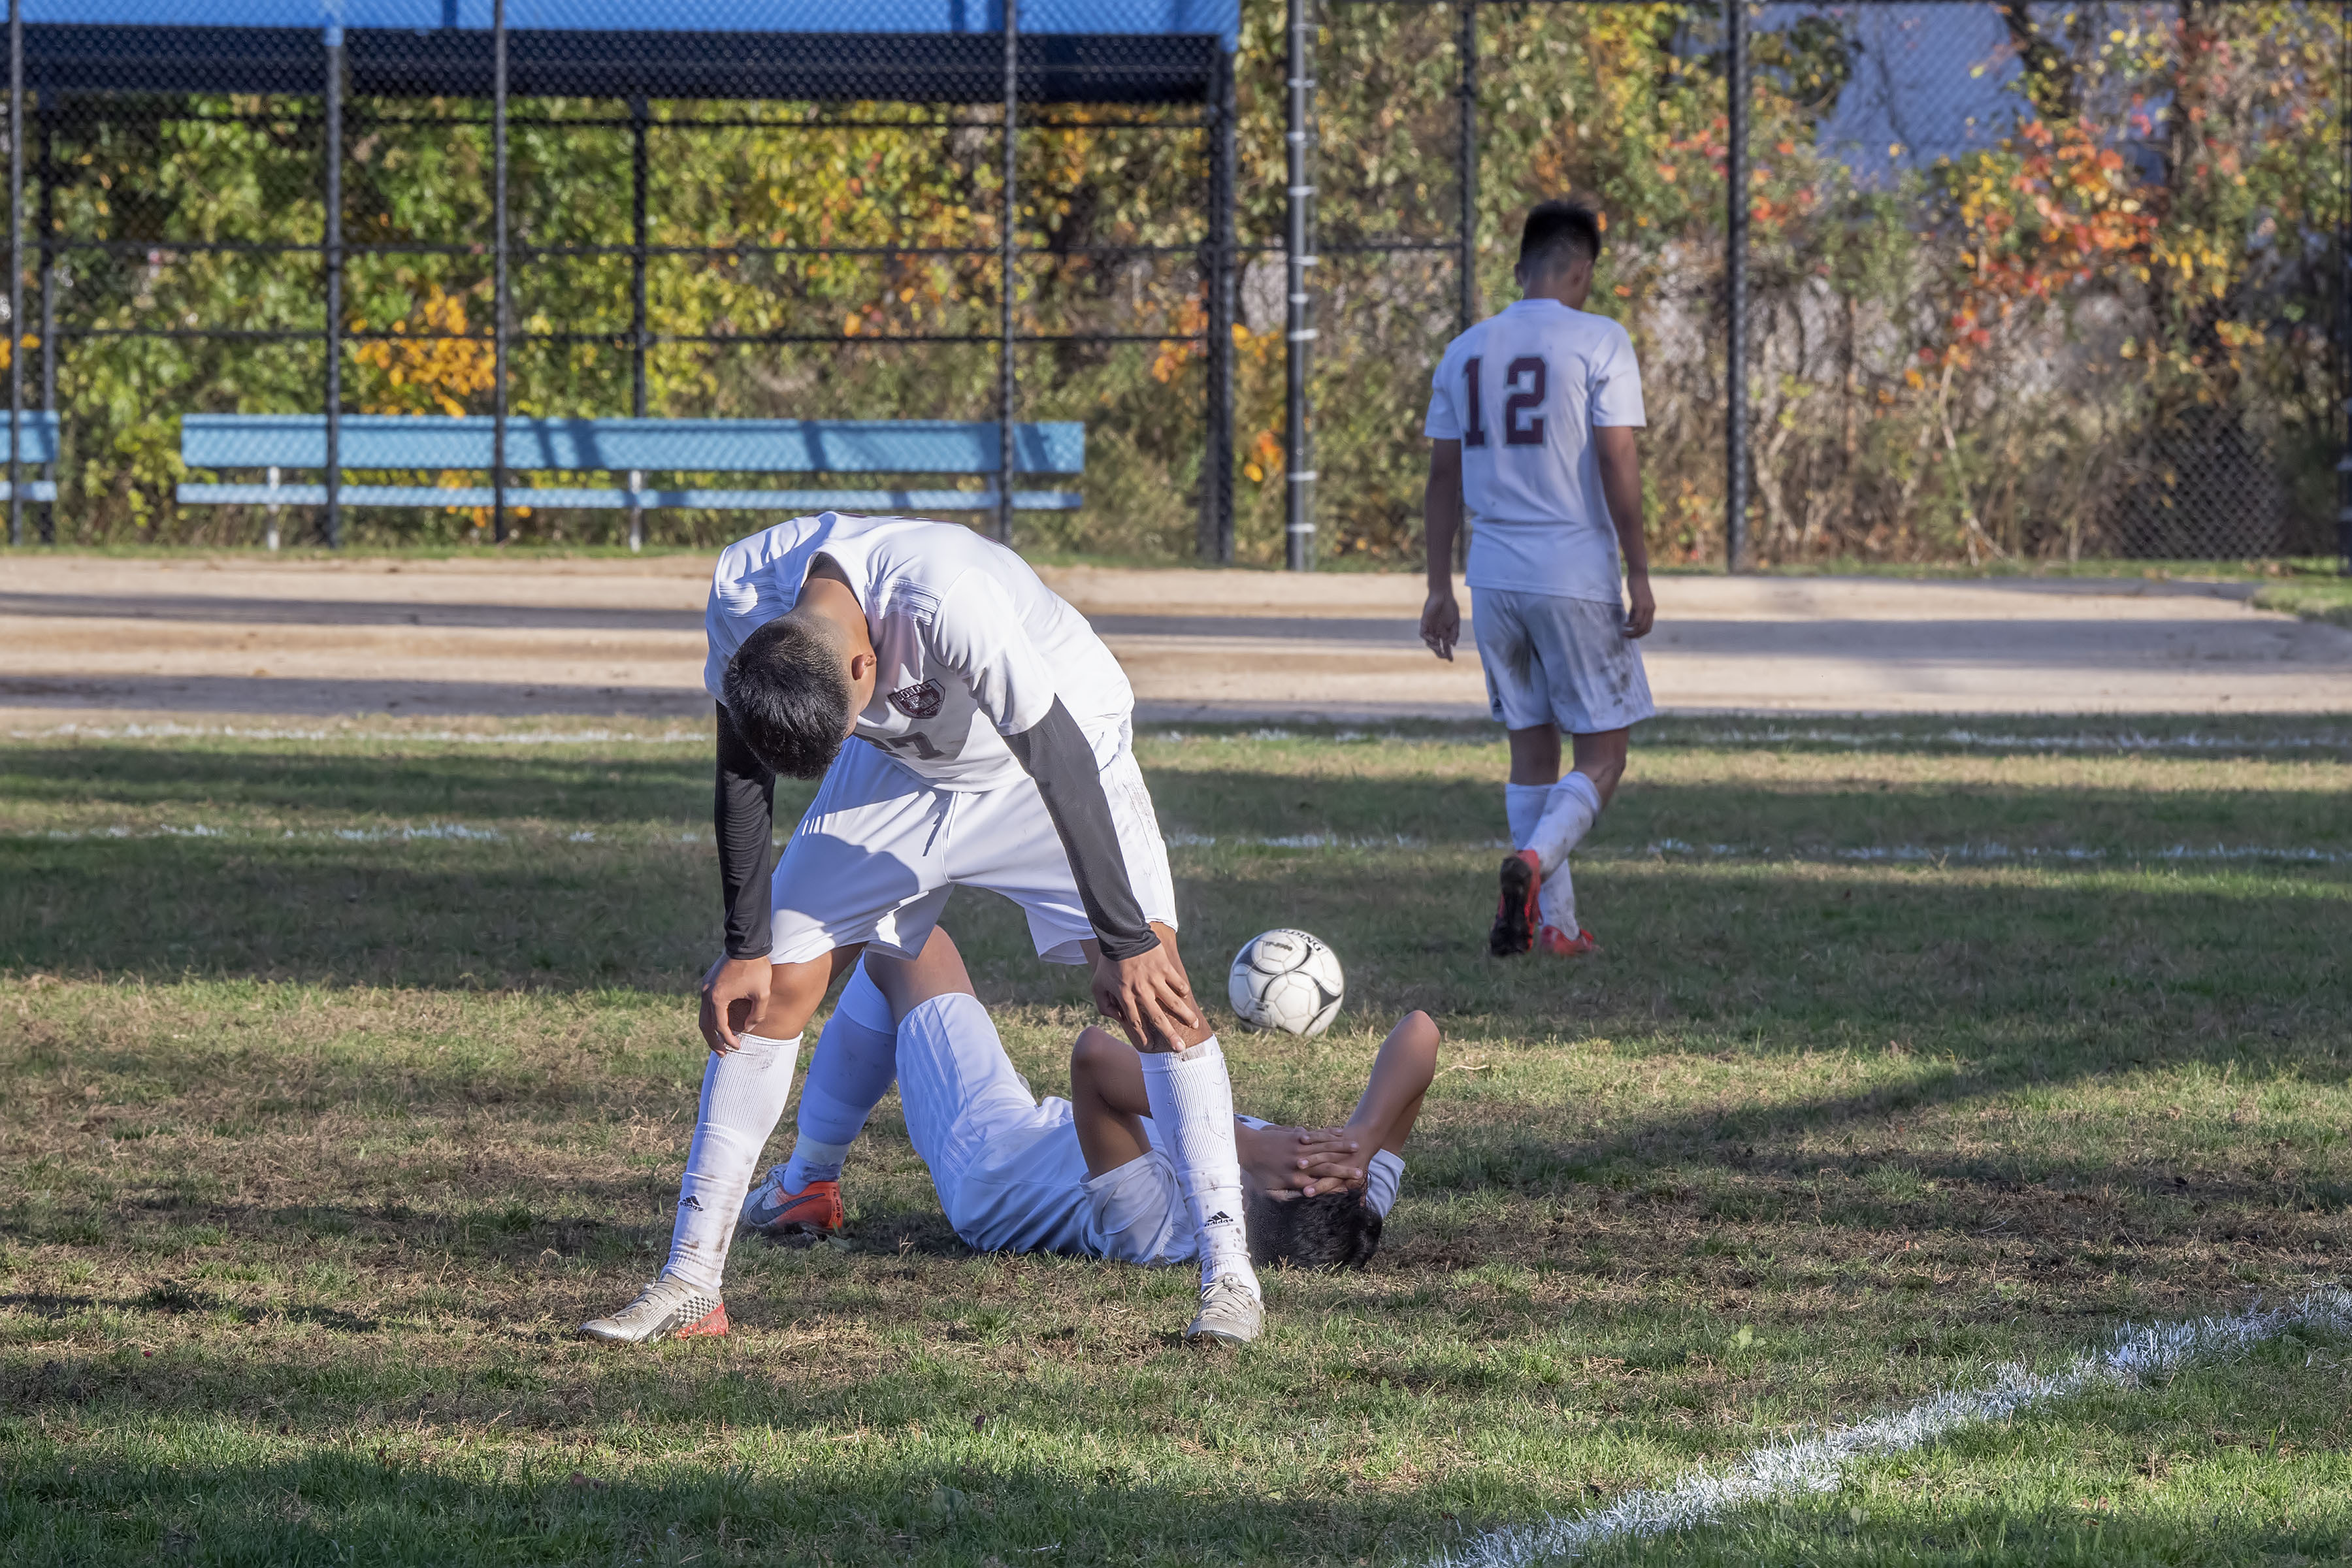 The Bonackers are in disbelief after suffering a 1-0 double overtime loss at Elwood/John Glenn on Monday afternoon.